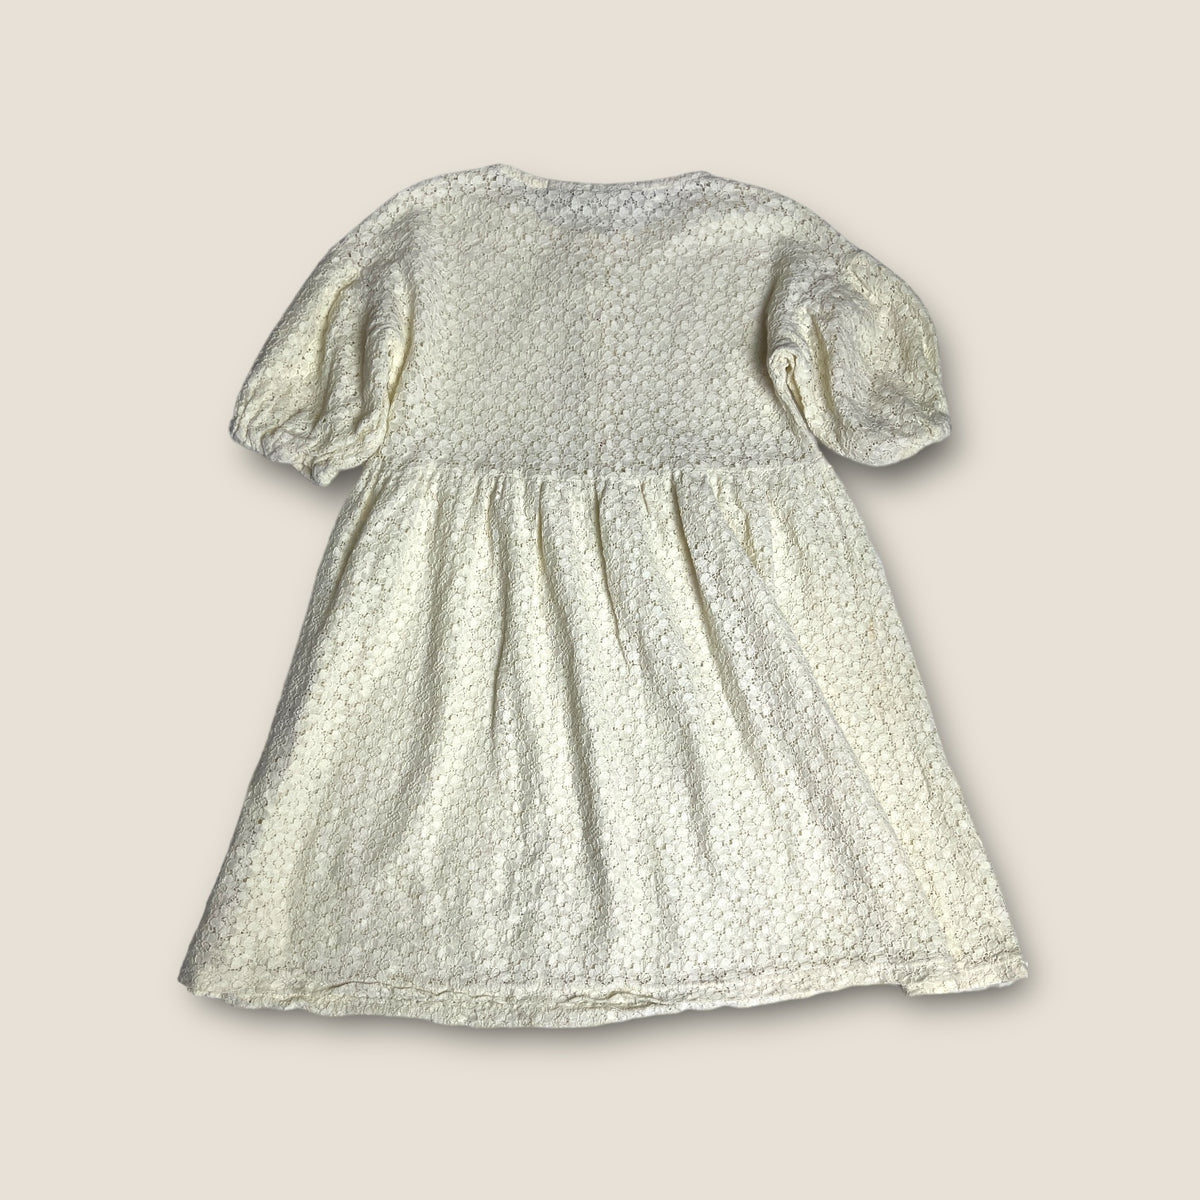 The Campamento Dress size 3-4 years